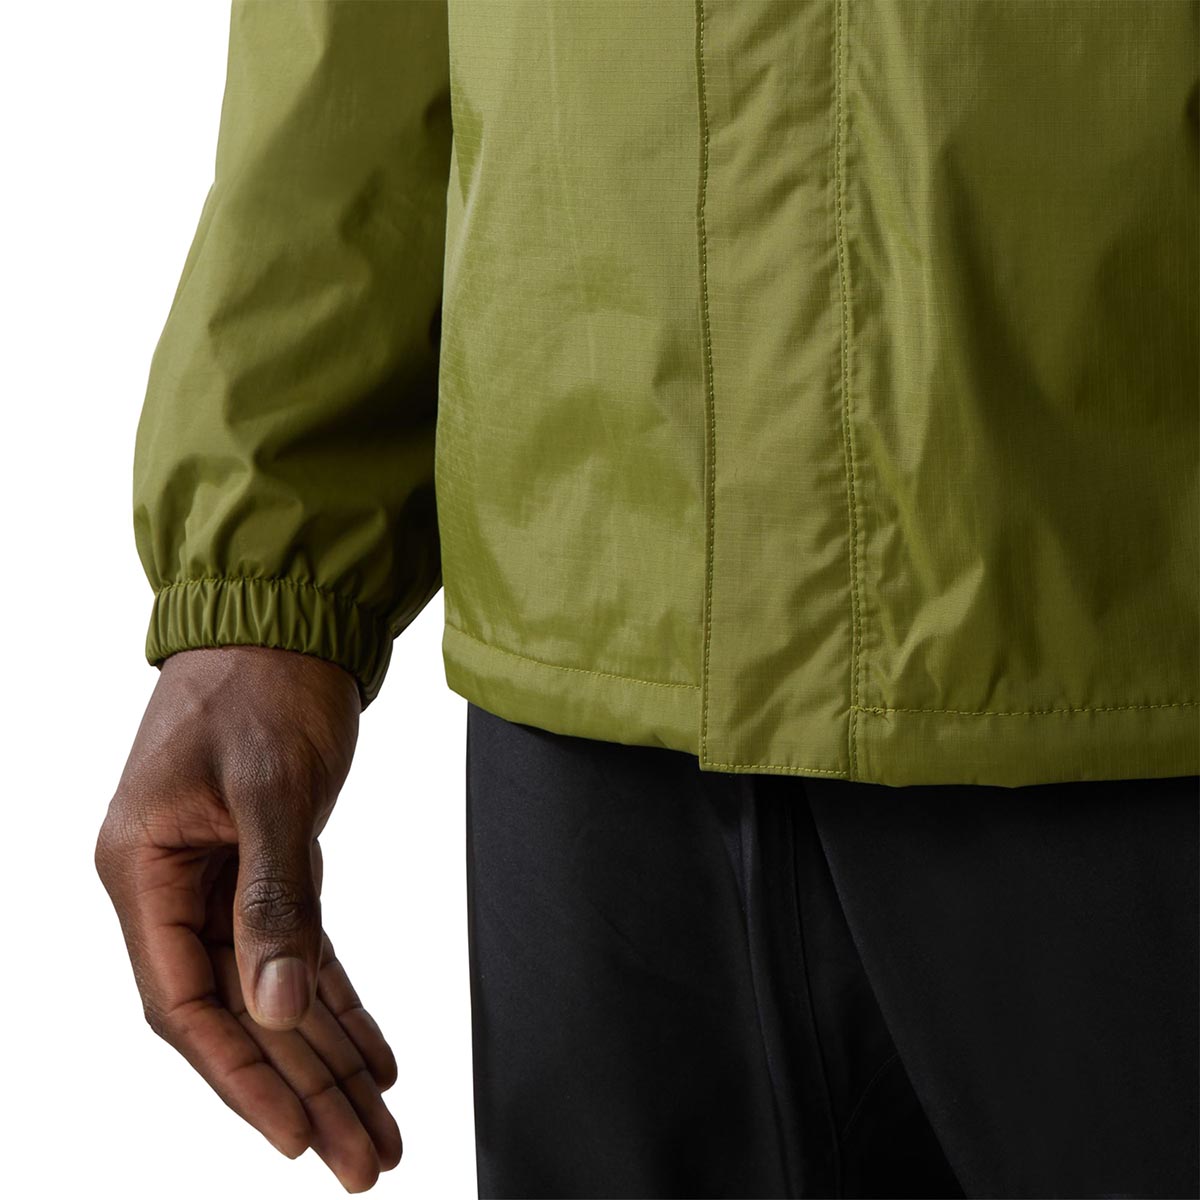 THE NORTH FACE - ANTORA JACKET